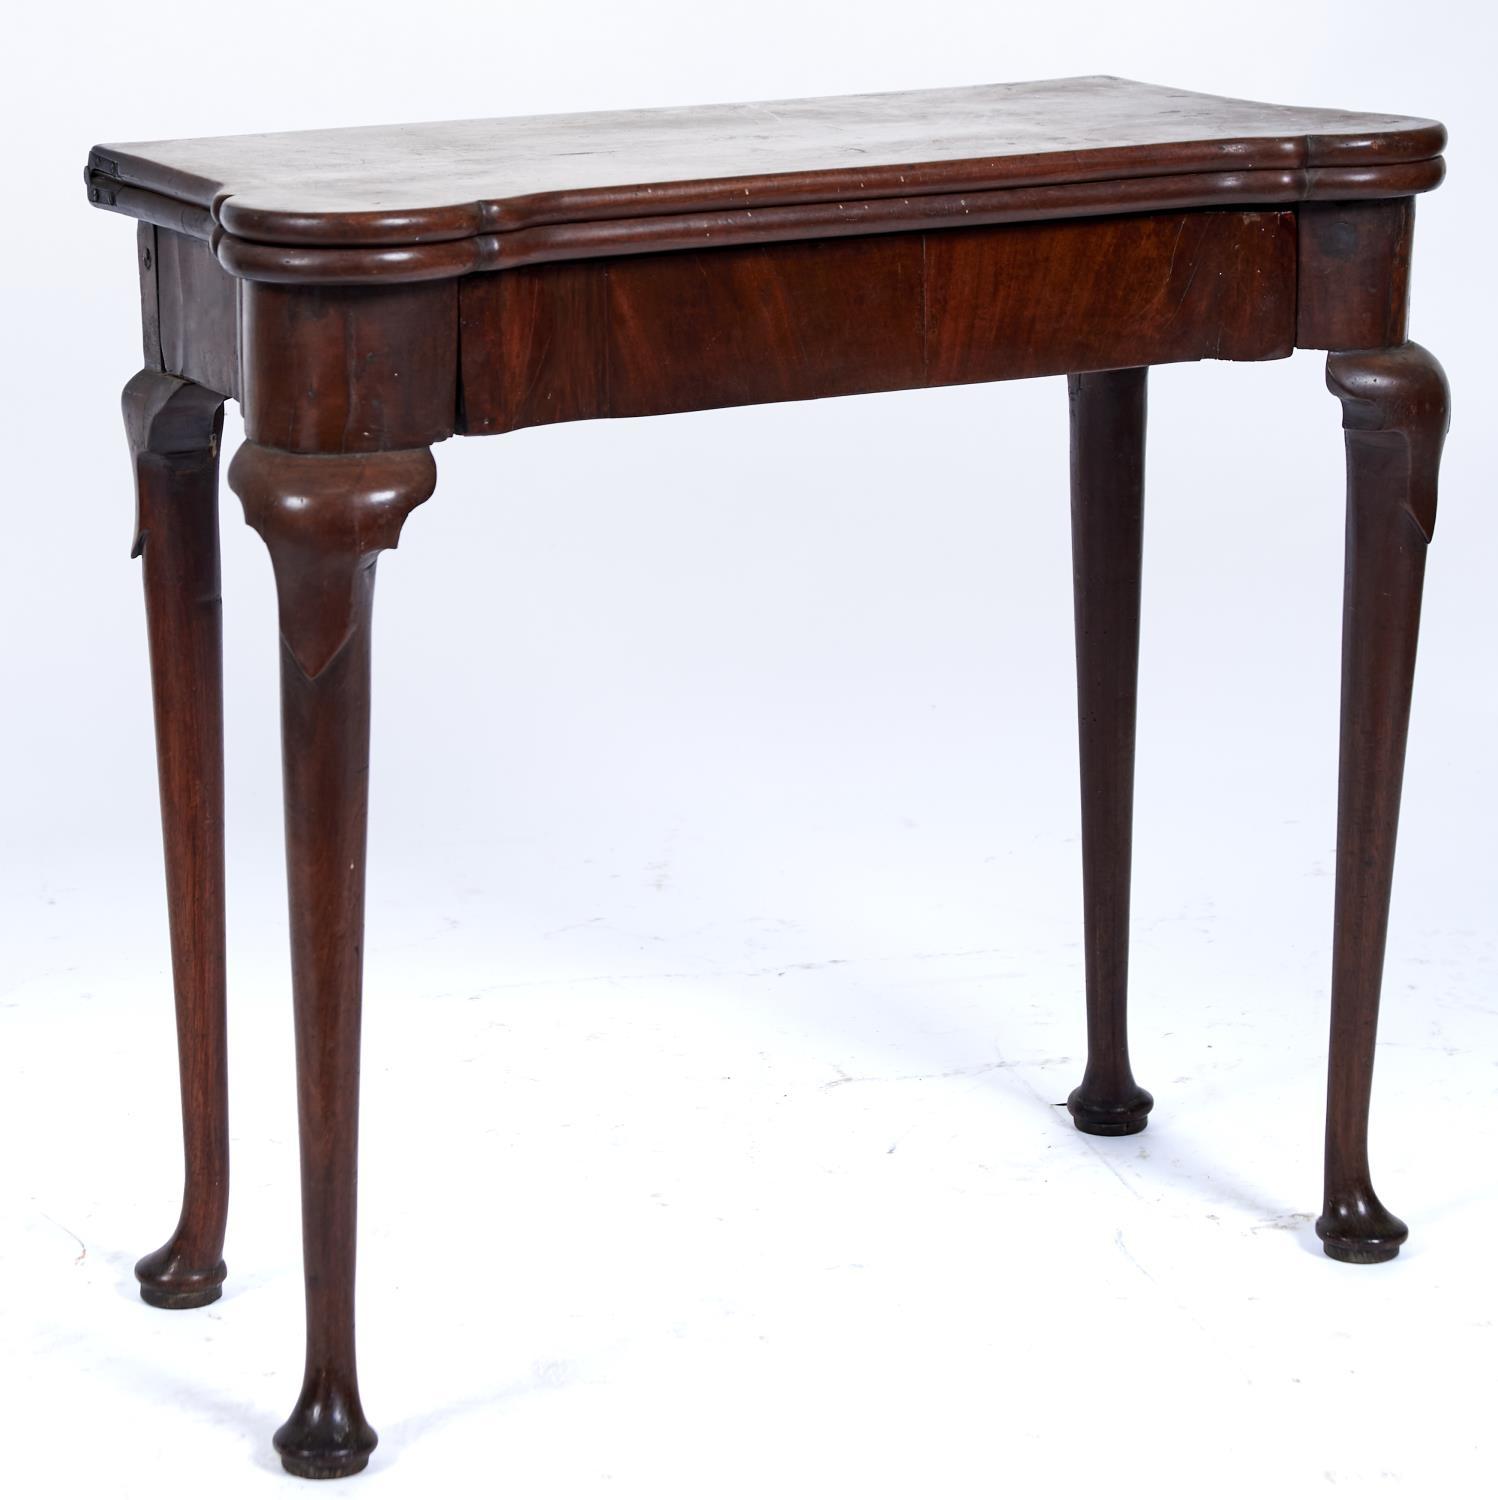 A GEORGE II MAHOGANY CARD TABLE, C1750, THE TOP WITH PAIR OF ROUNDED ANGLES REVEALING A GREEN